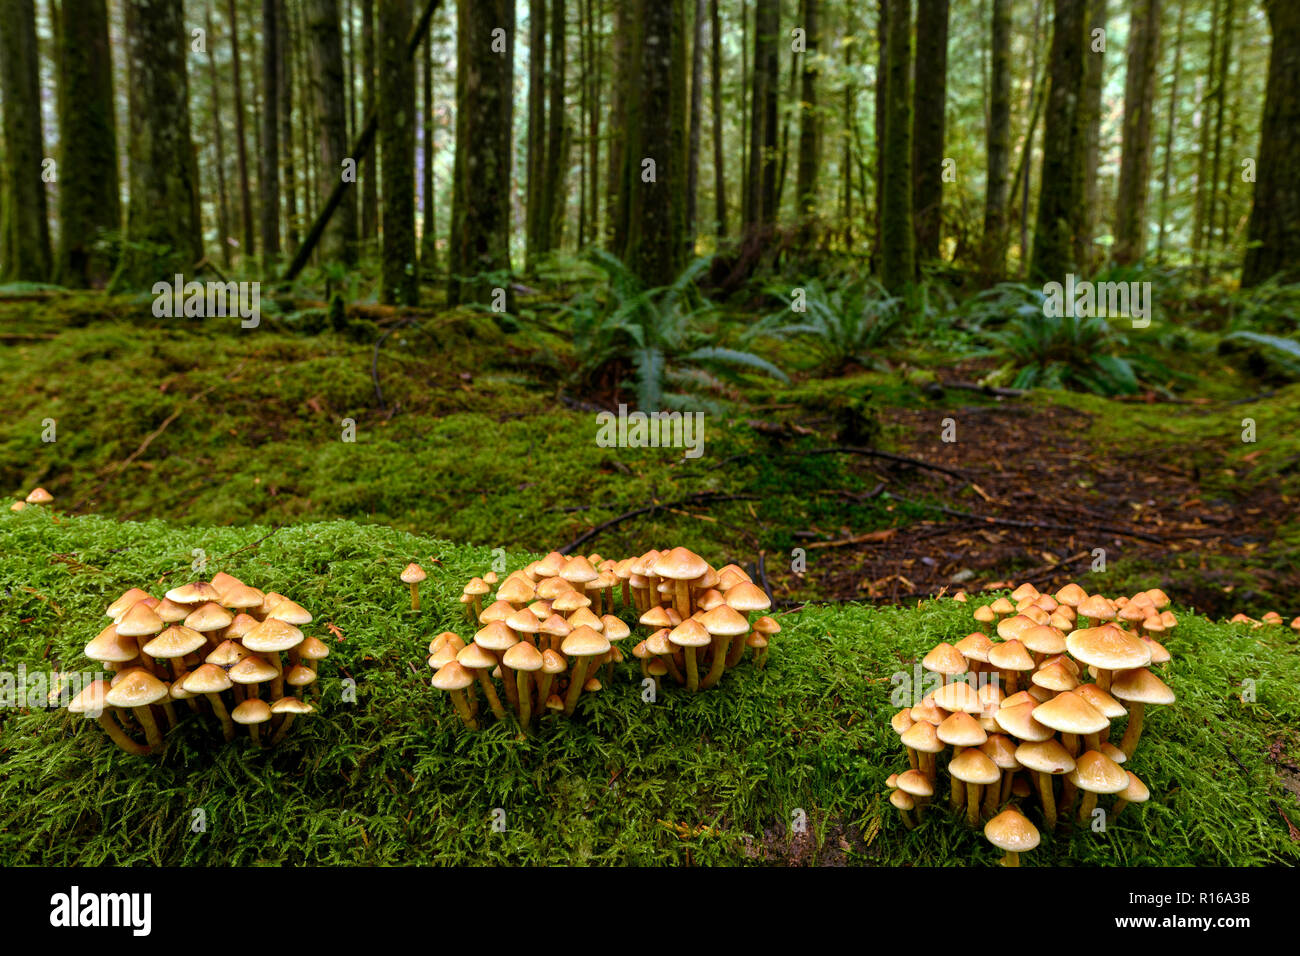 Lush vegetation, giant trees overgrown with moss, ferns and fungi colony in the rain forest in the Golden Ears Provincial Park, British Columbia, Cana Stock Photo